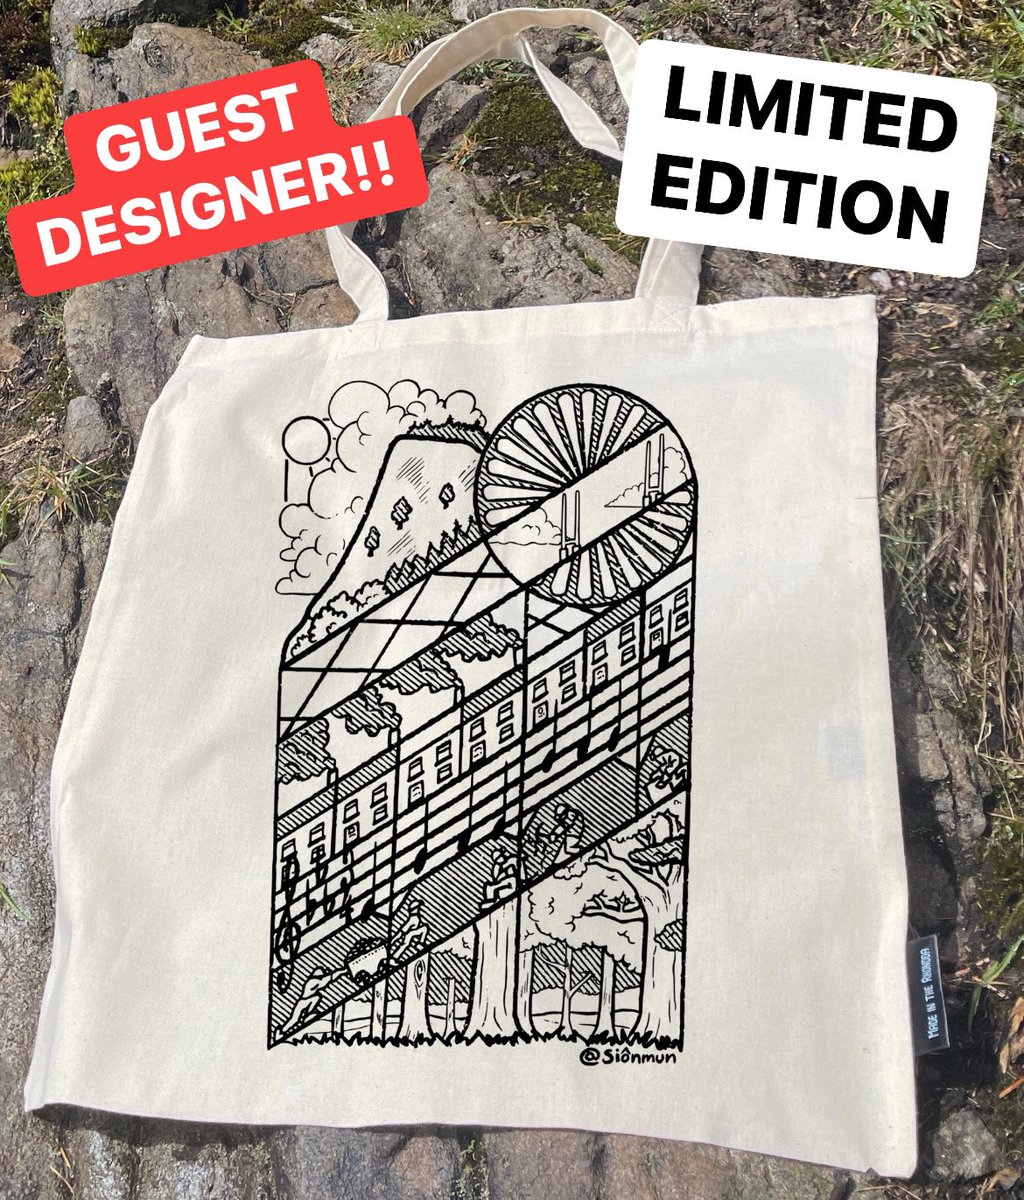 INTRODUCING - Our first Guest Designer!! @sionmun & BAGSY collaboration A LIMITED EDITION BAGSY BAG design. Preorder now at bagsybags.com/shop/?orderby=… Supporting Creativity and Manufacturing in Cymru 🏴󠁧󠁢󠁷󠁬󠁳󠁿 :-)